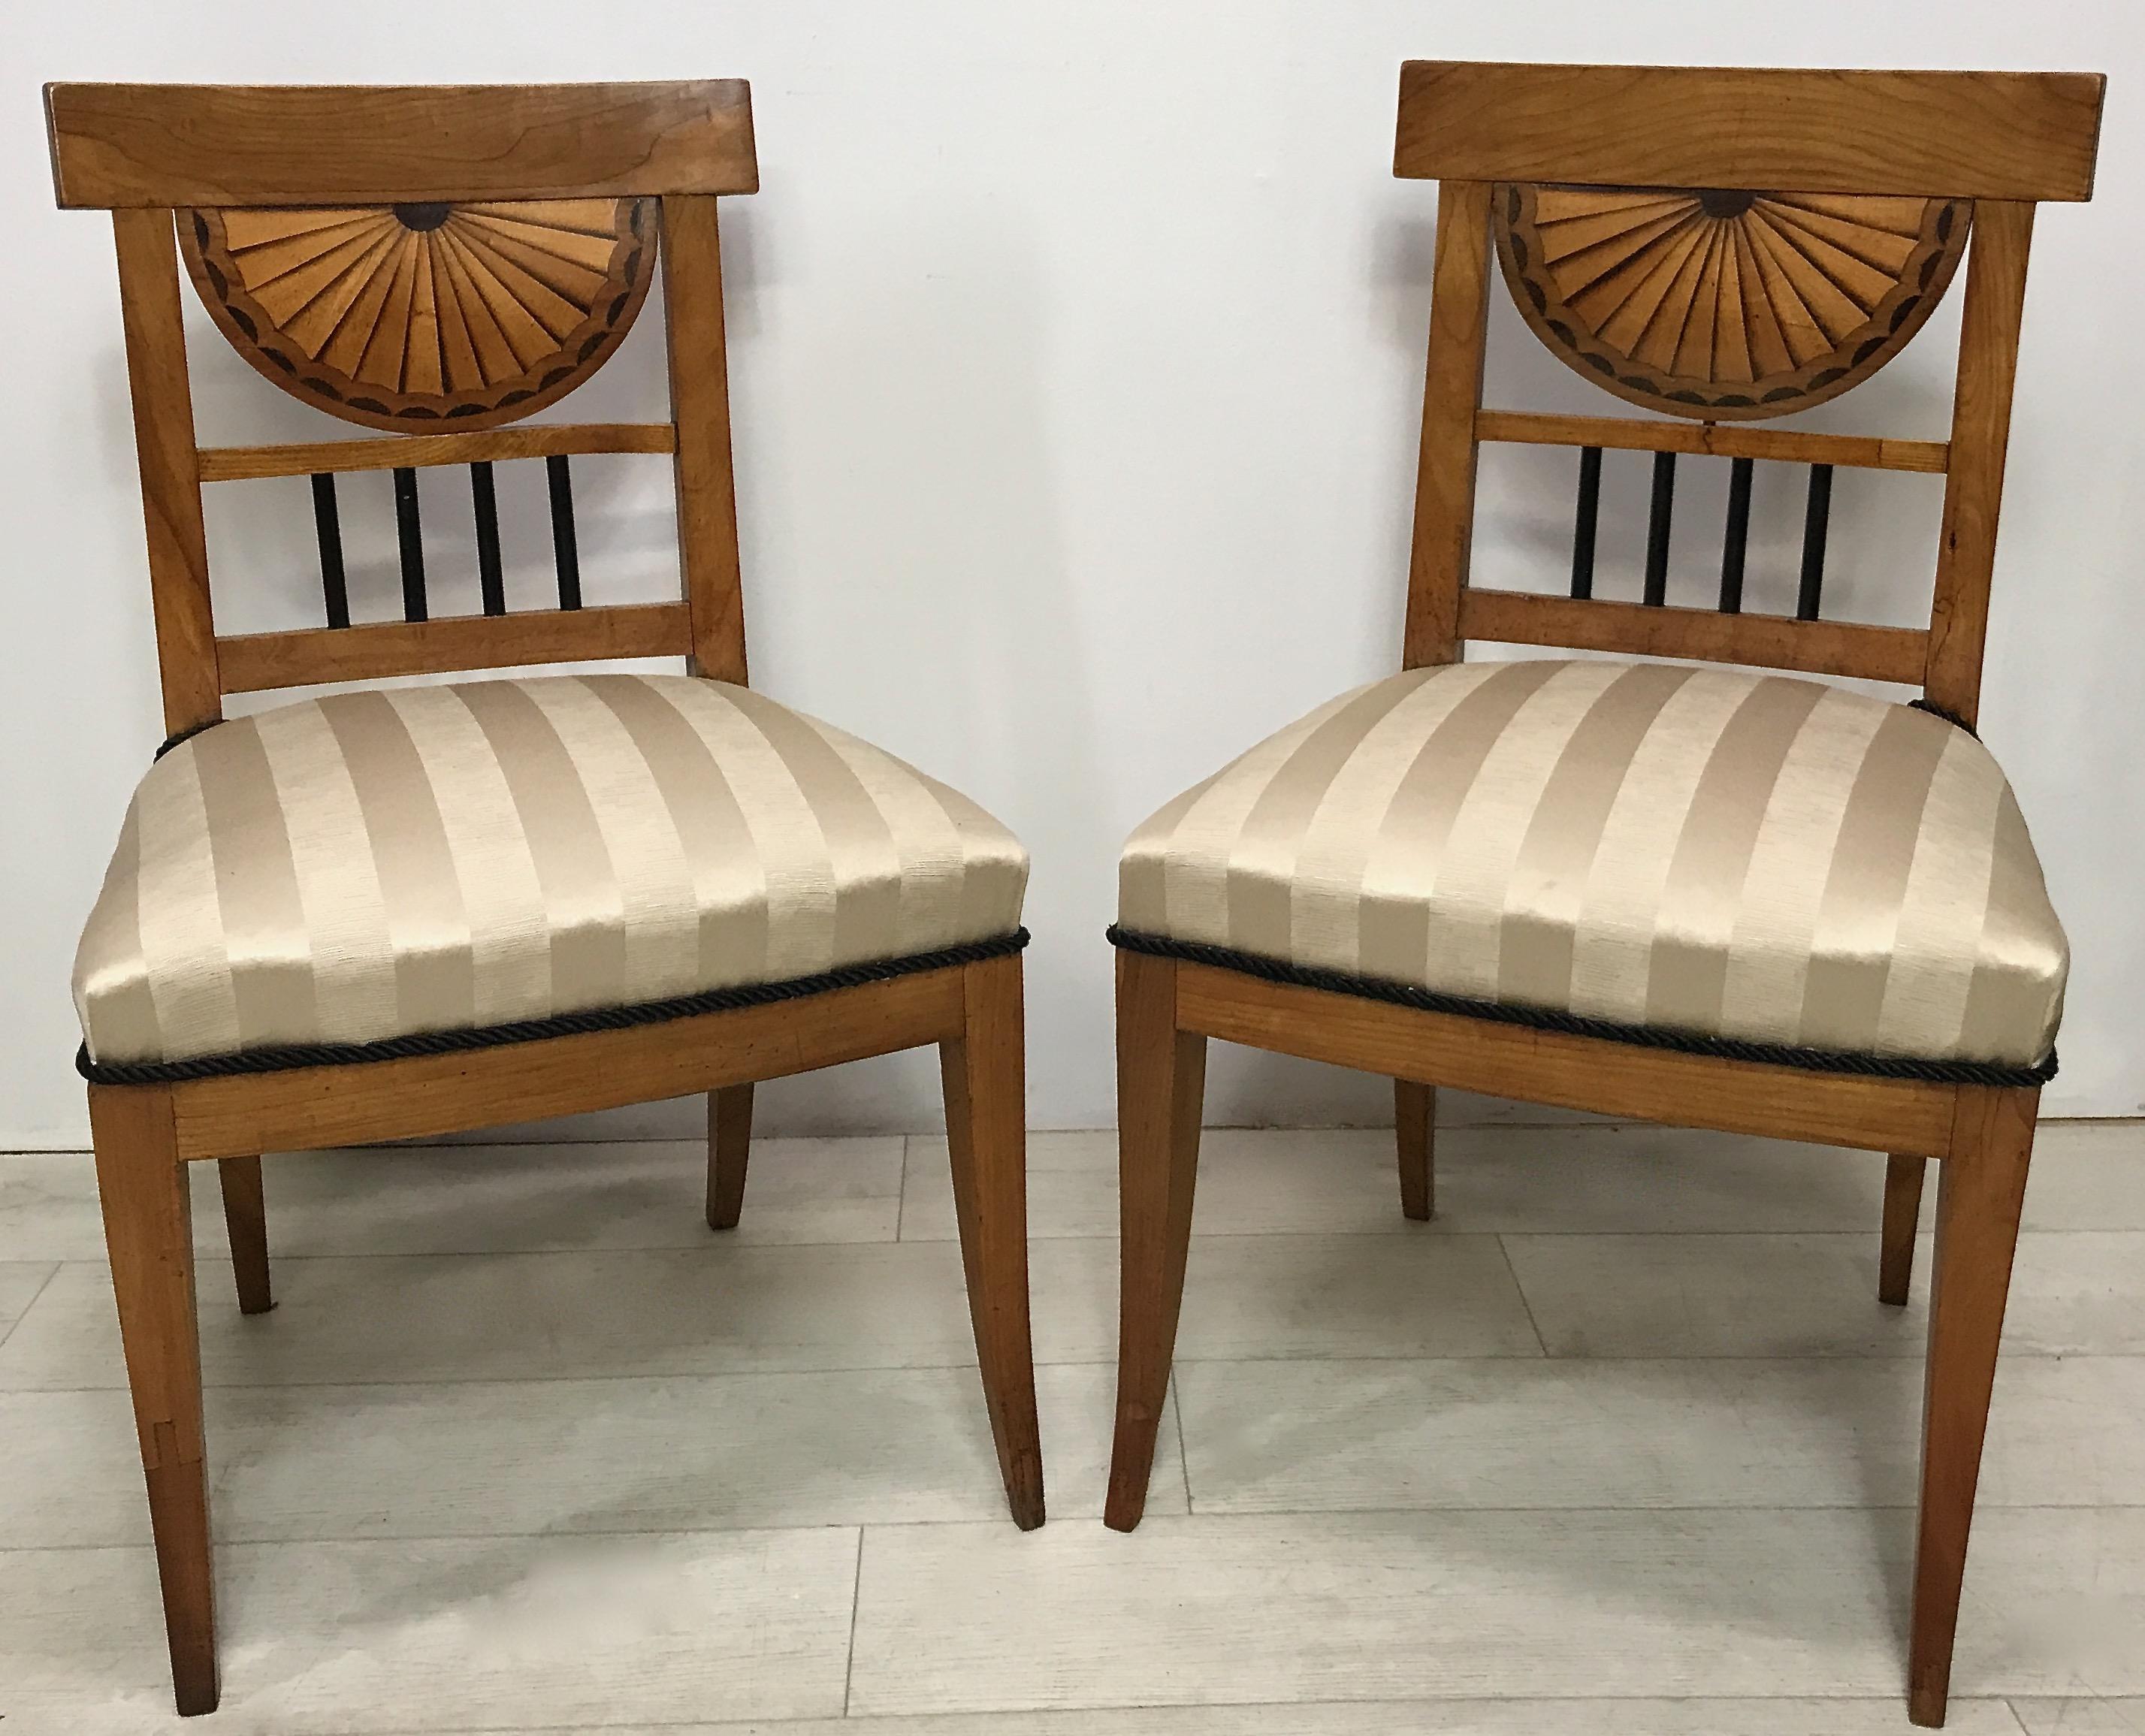 Pair of Cherrywood Biedermeier Side Chairs, European Early 19th Century In Good Condition For Sale In San Francisco, CA